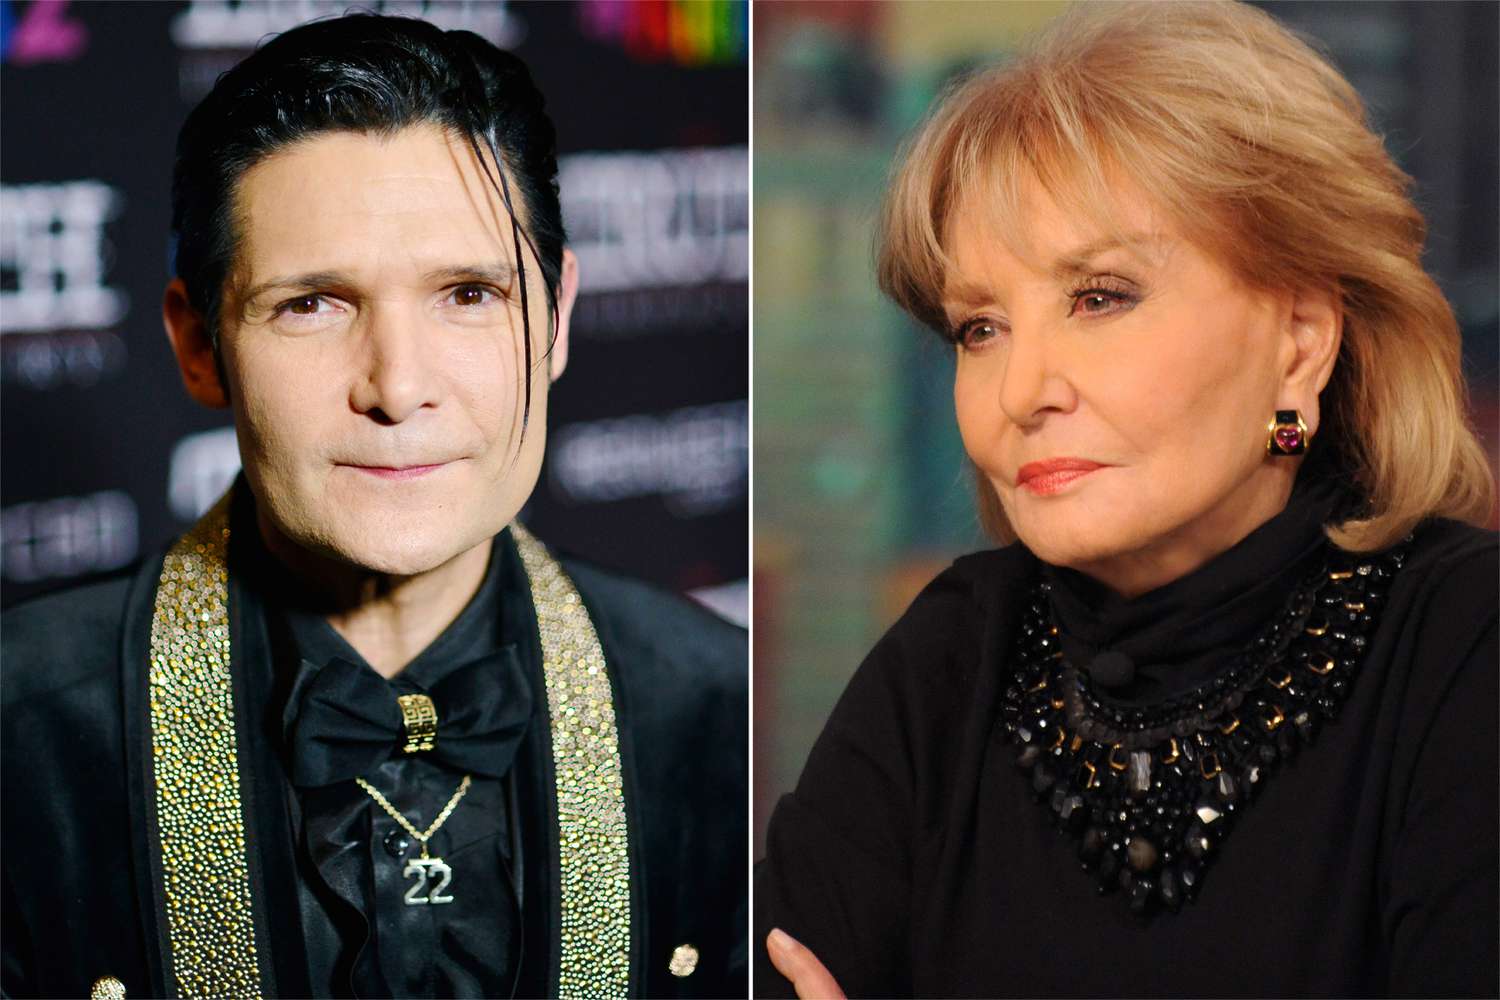 Corey Feldman says Barbara Walters clash on 'The View' was 'like a knife in the heart'